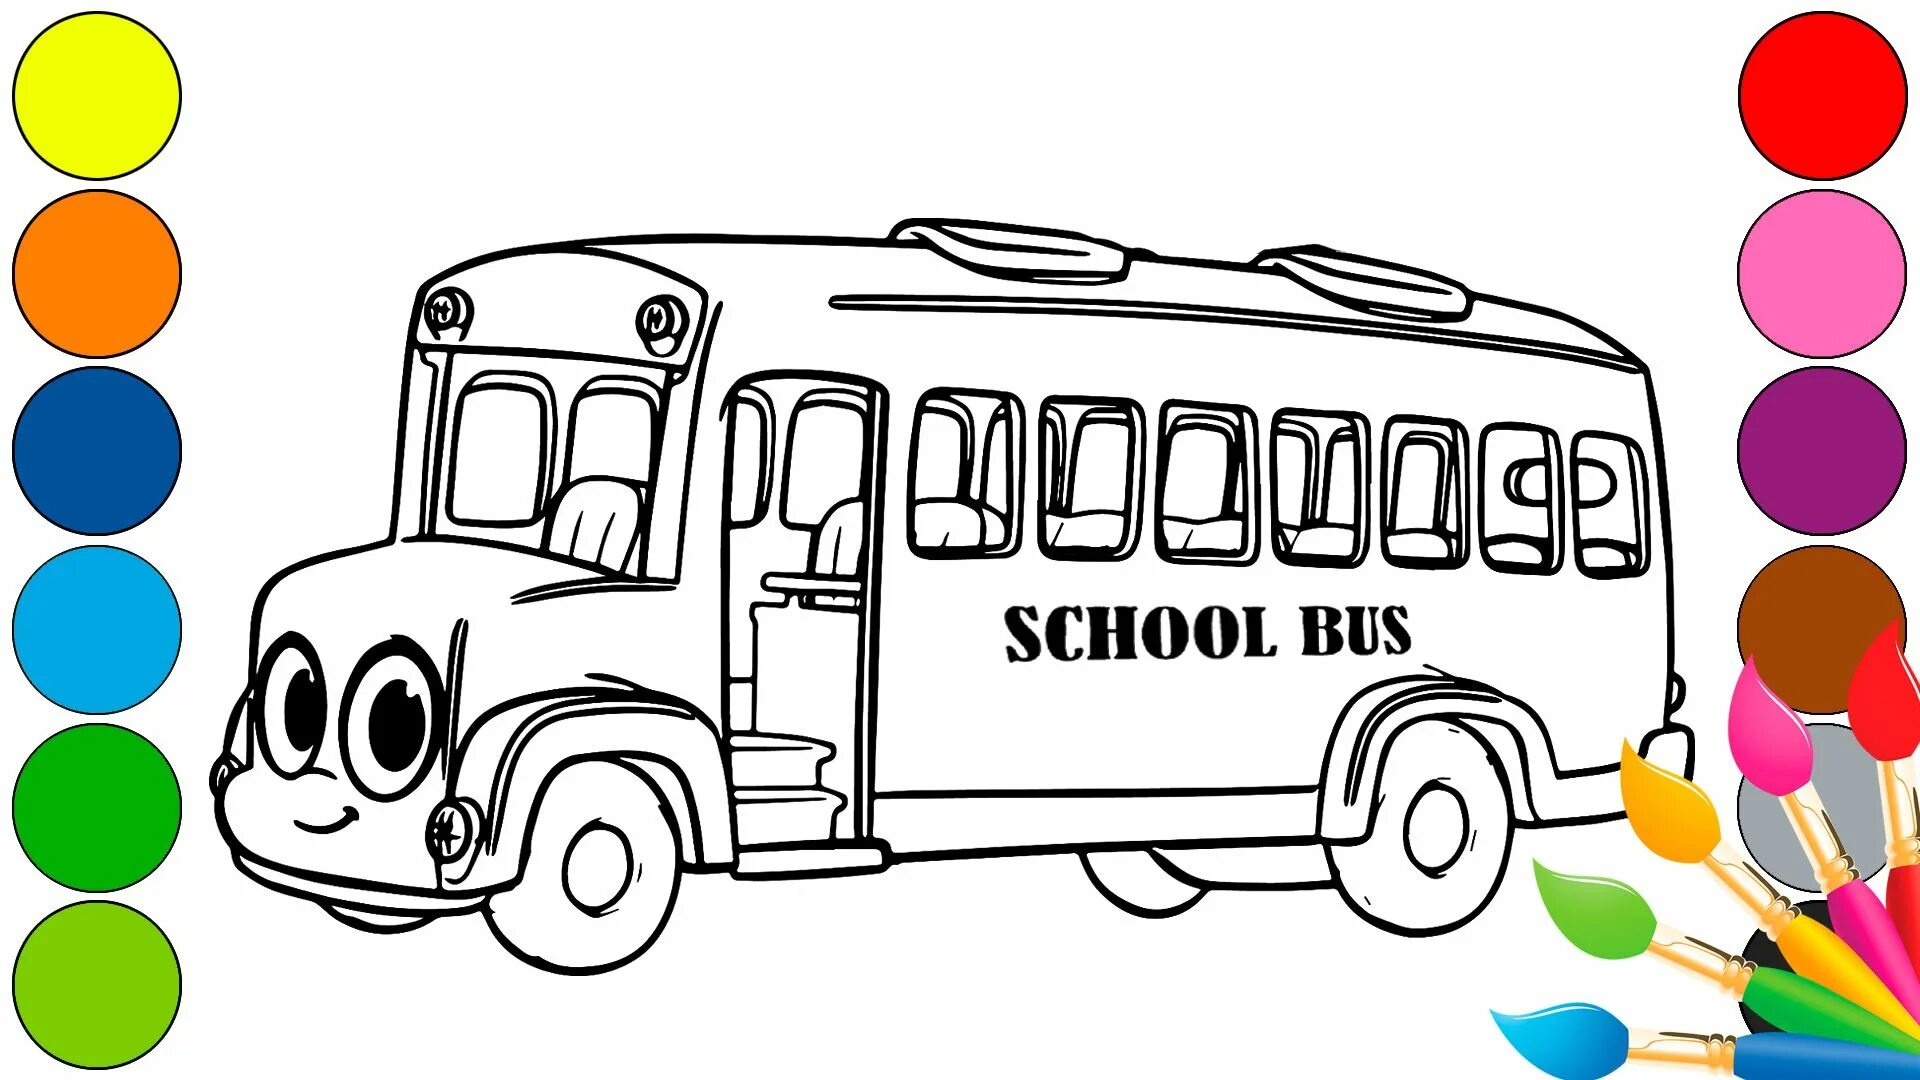 Fabulous accordion bus coloring page